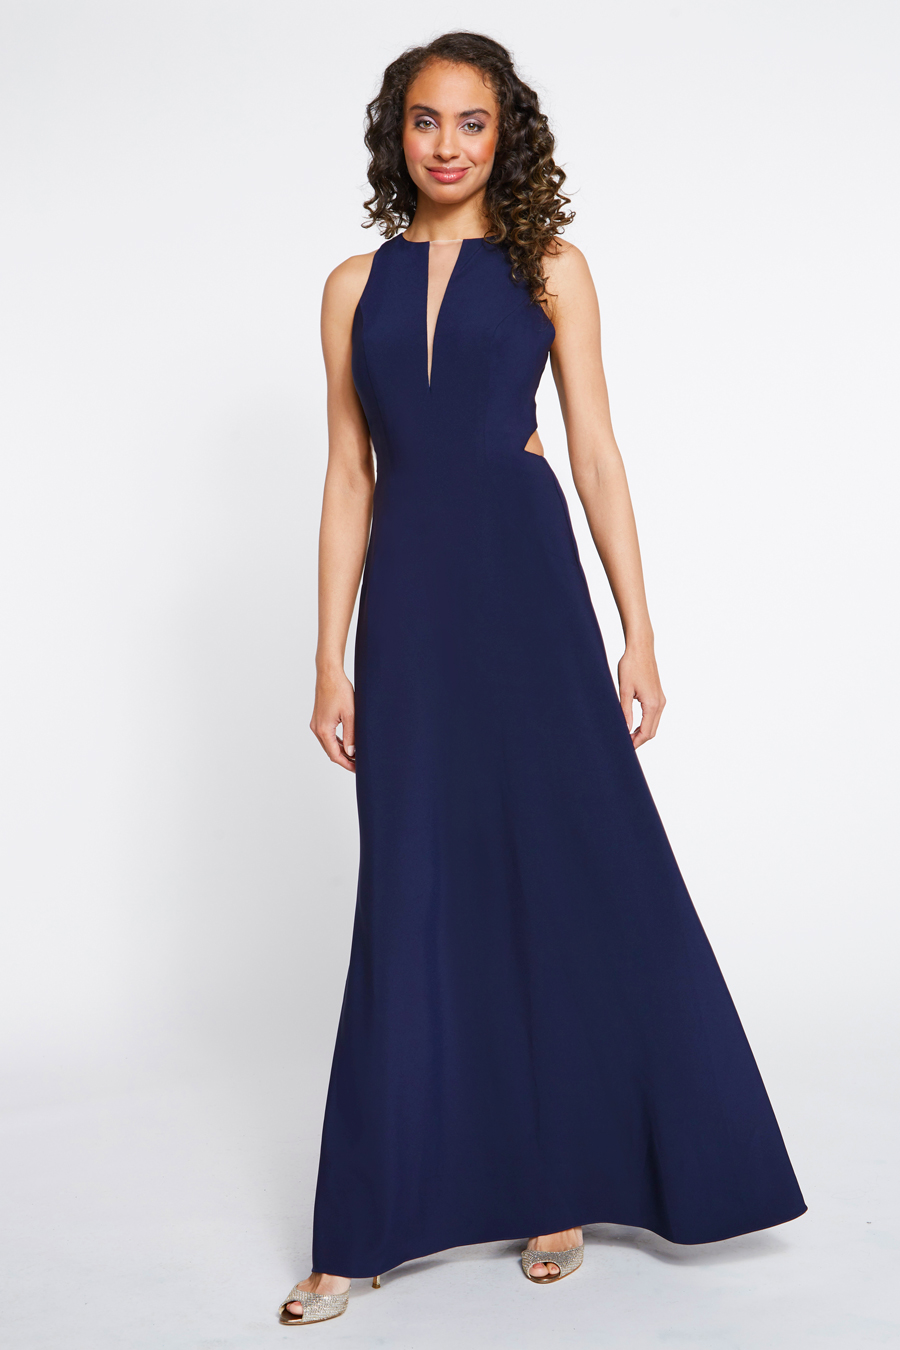 Bridesmaid dress with cutout V neckline bodice with racer back and A-line skirt